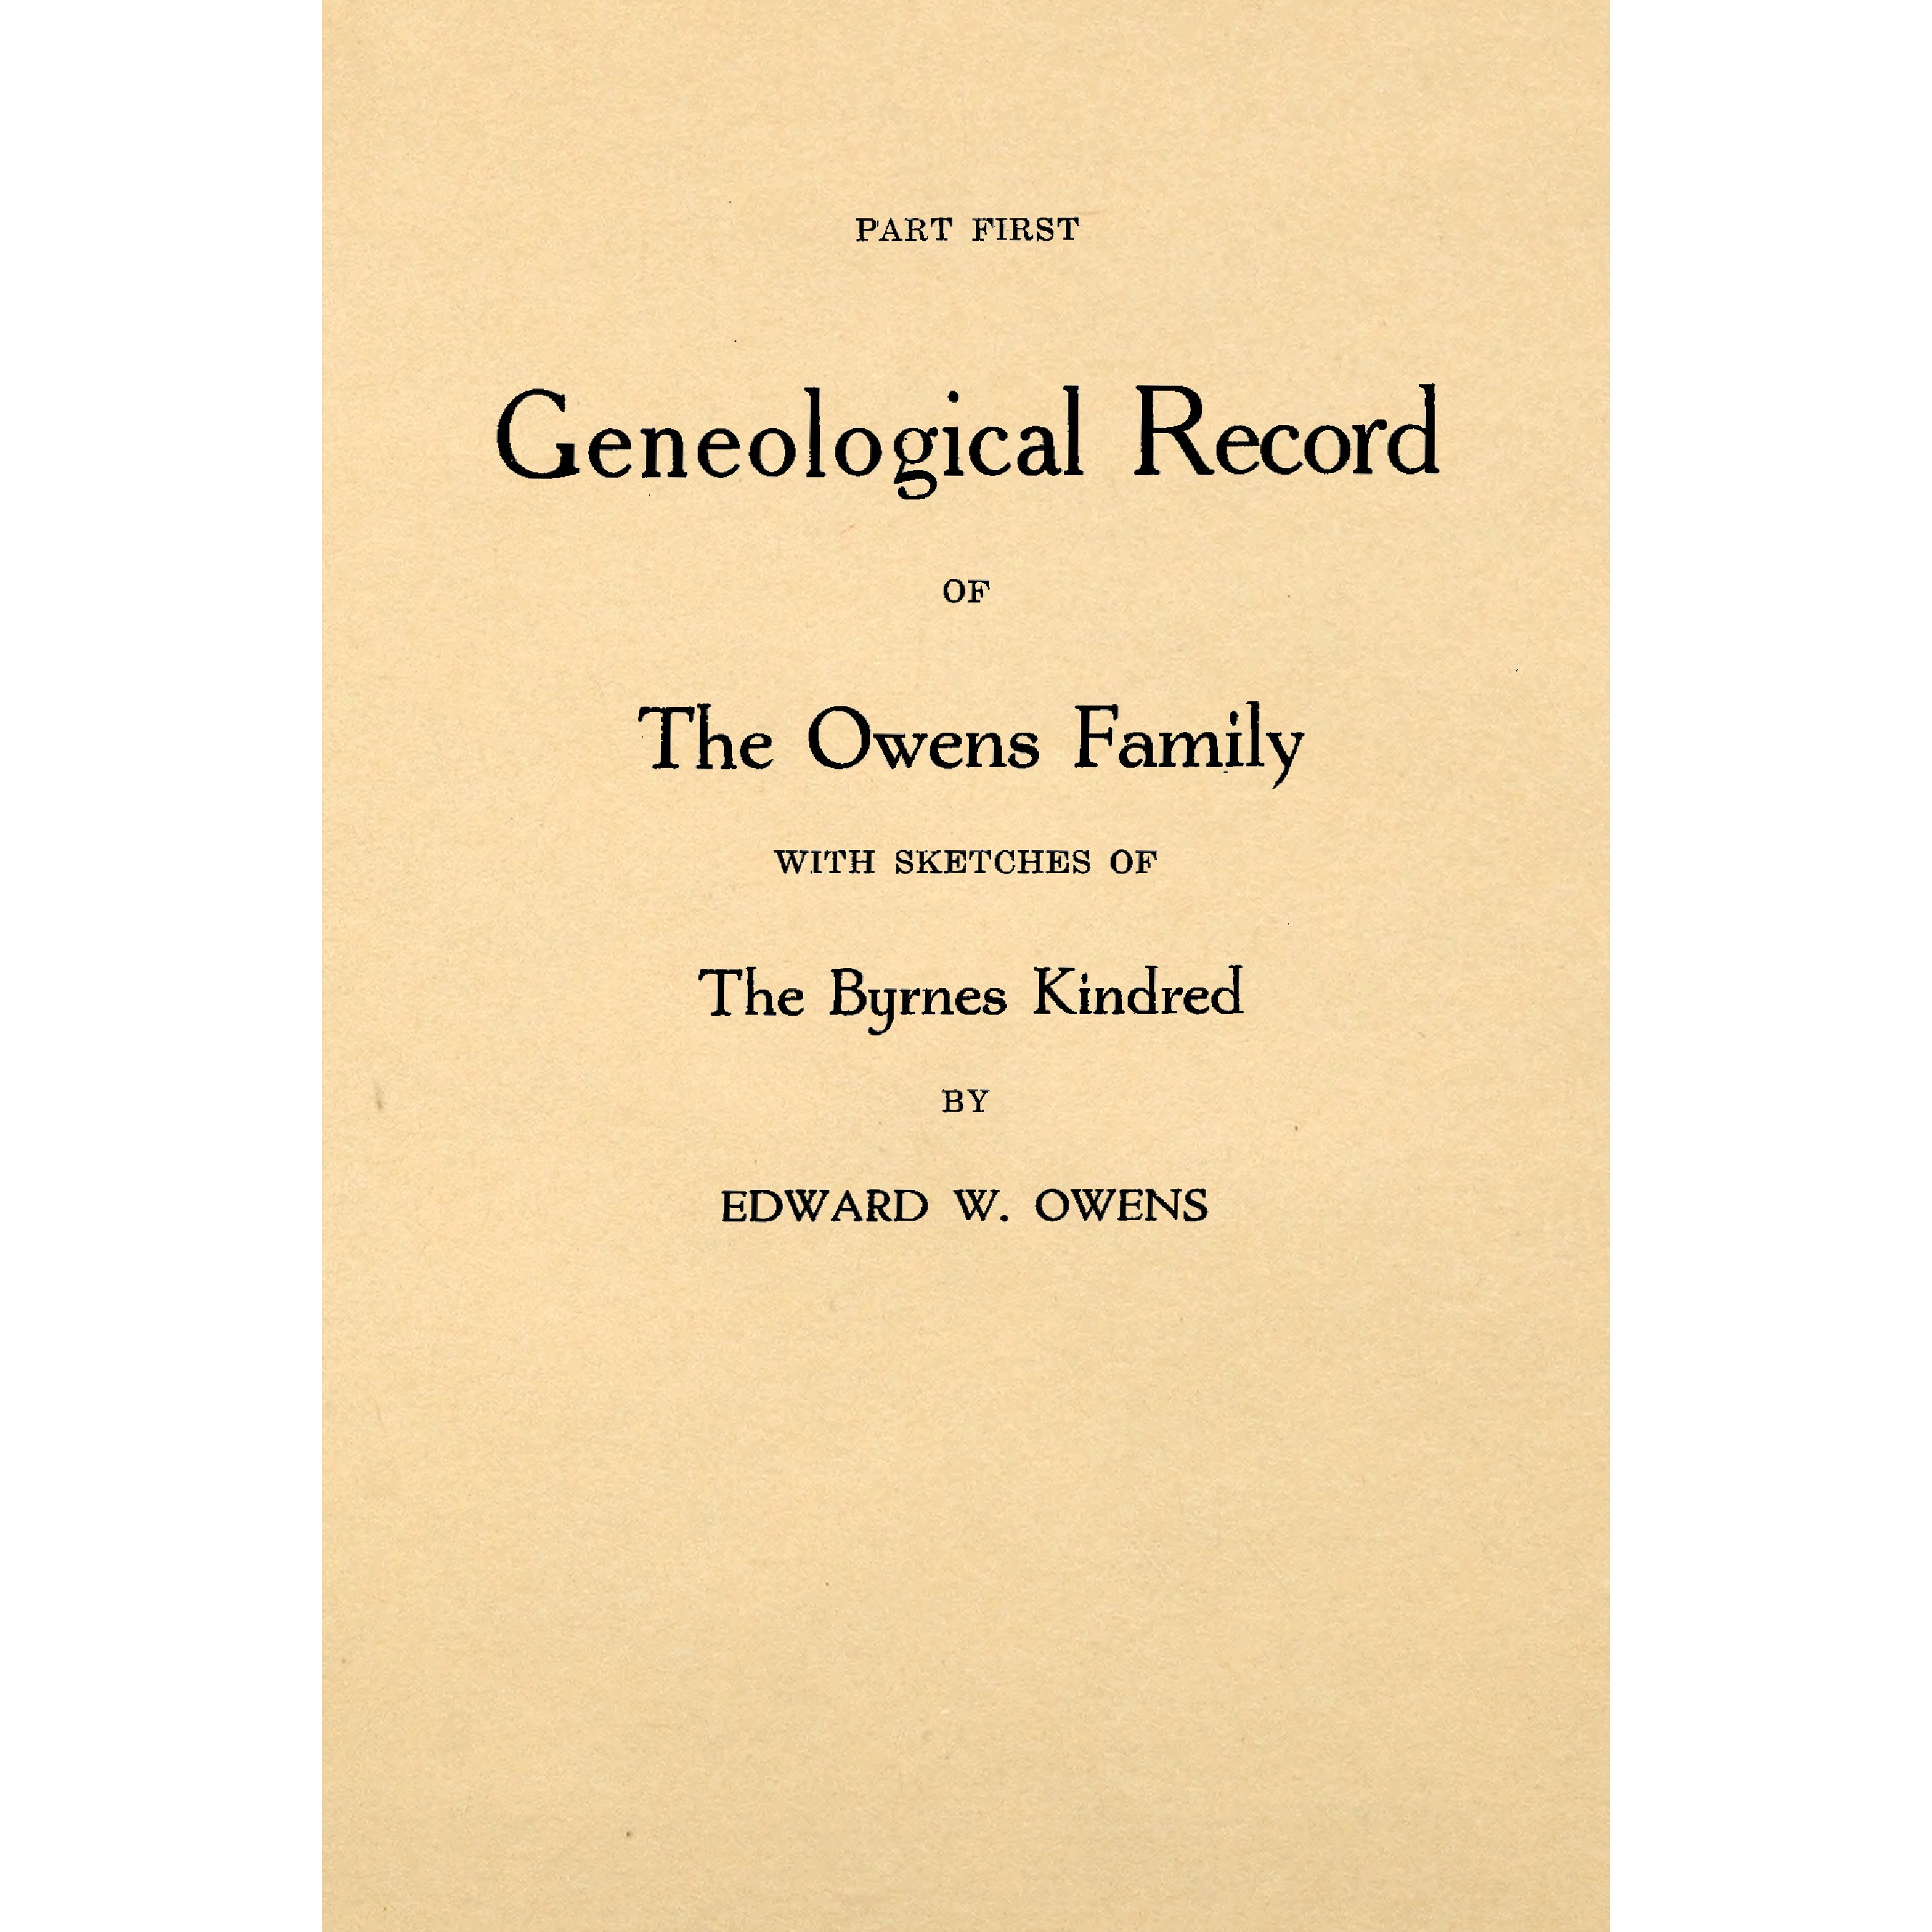 Genealogical record of the Owens Family with Sketches of the Byrnes Kindred